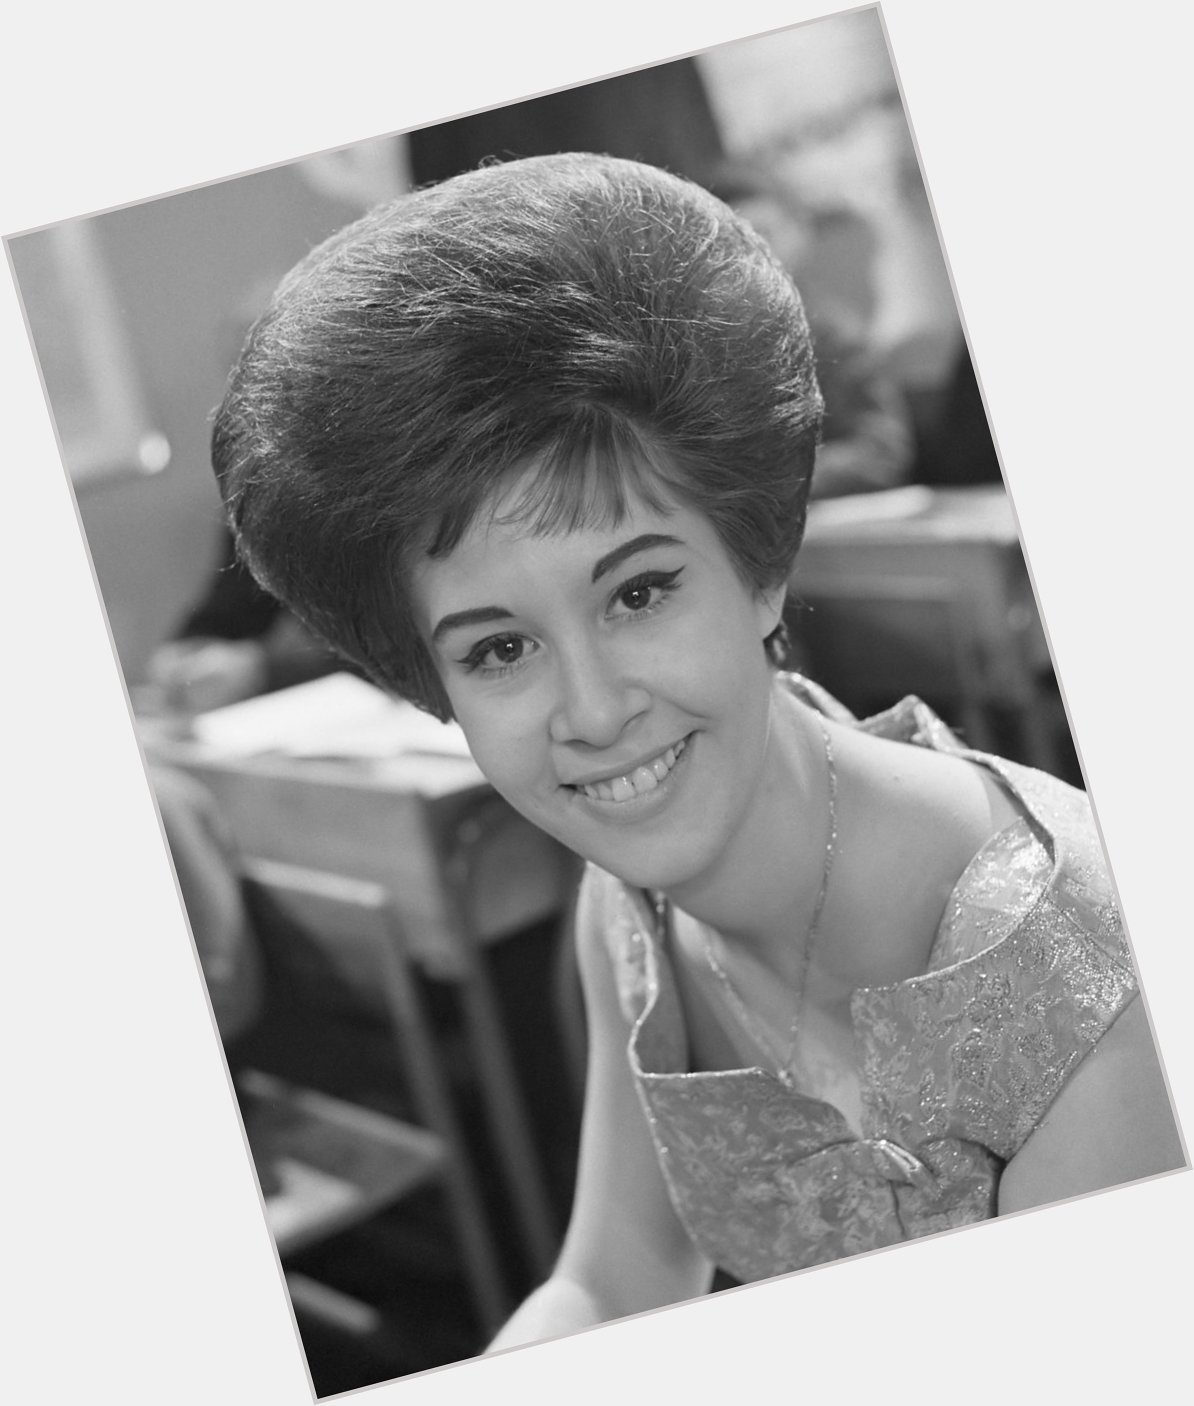 Happy birthday to Helen Shapiro, 73 today and still entertaining with her vocal talent! 